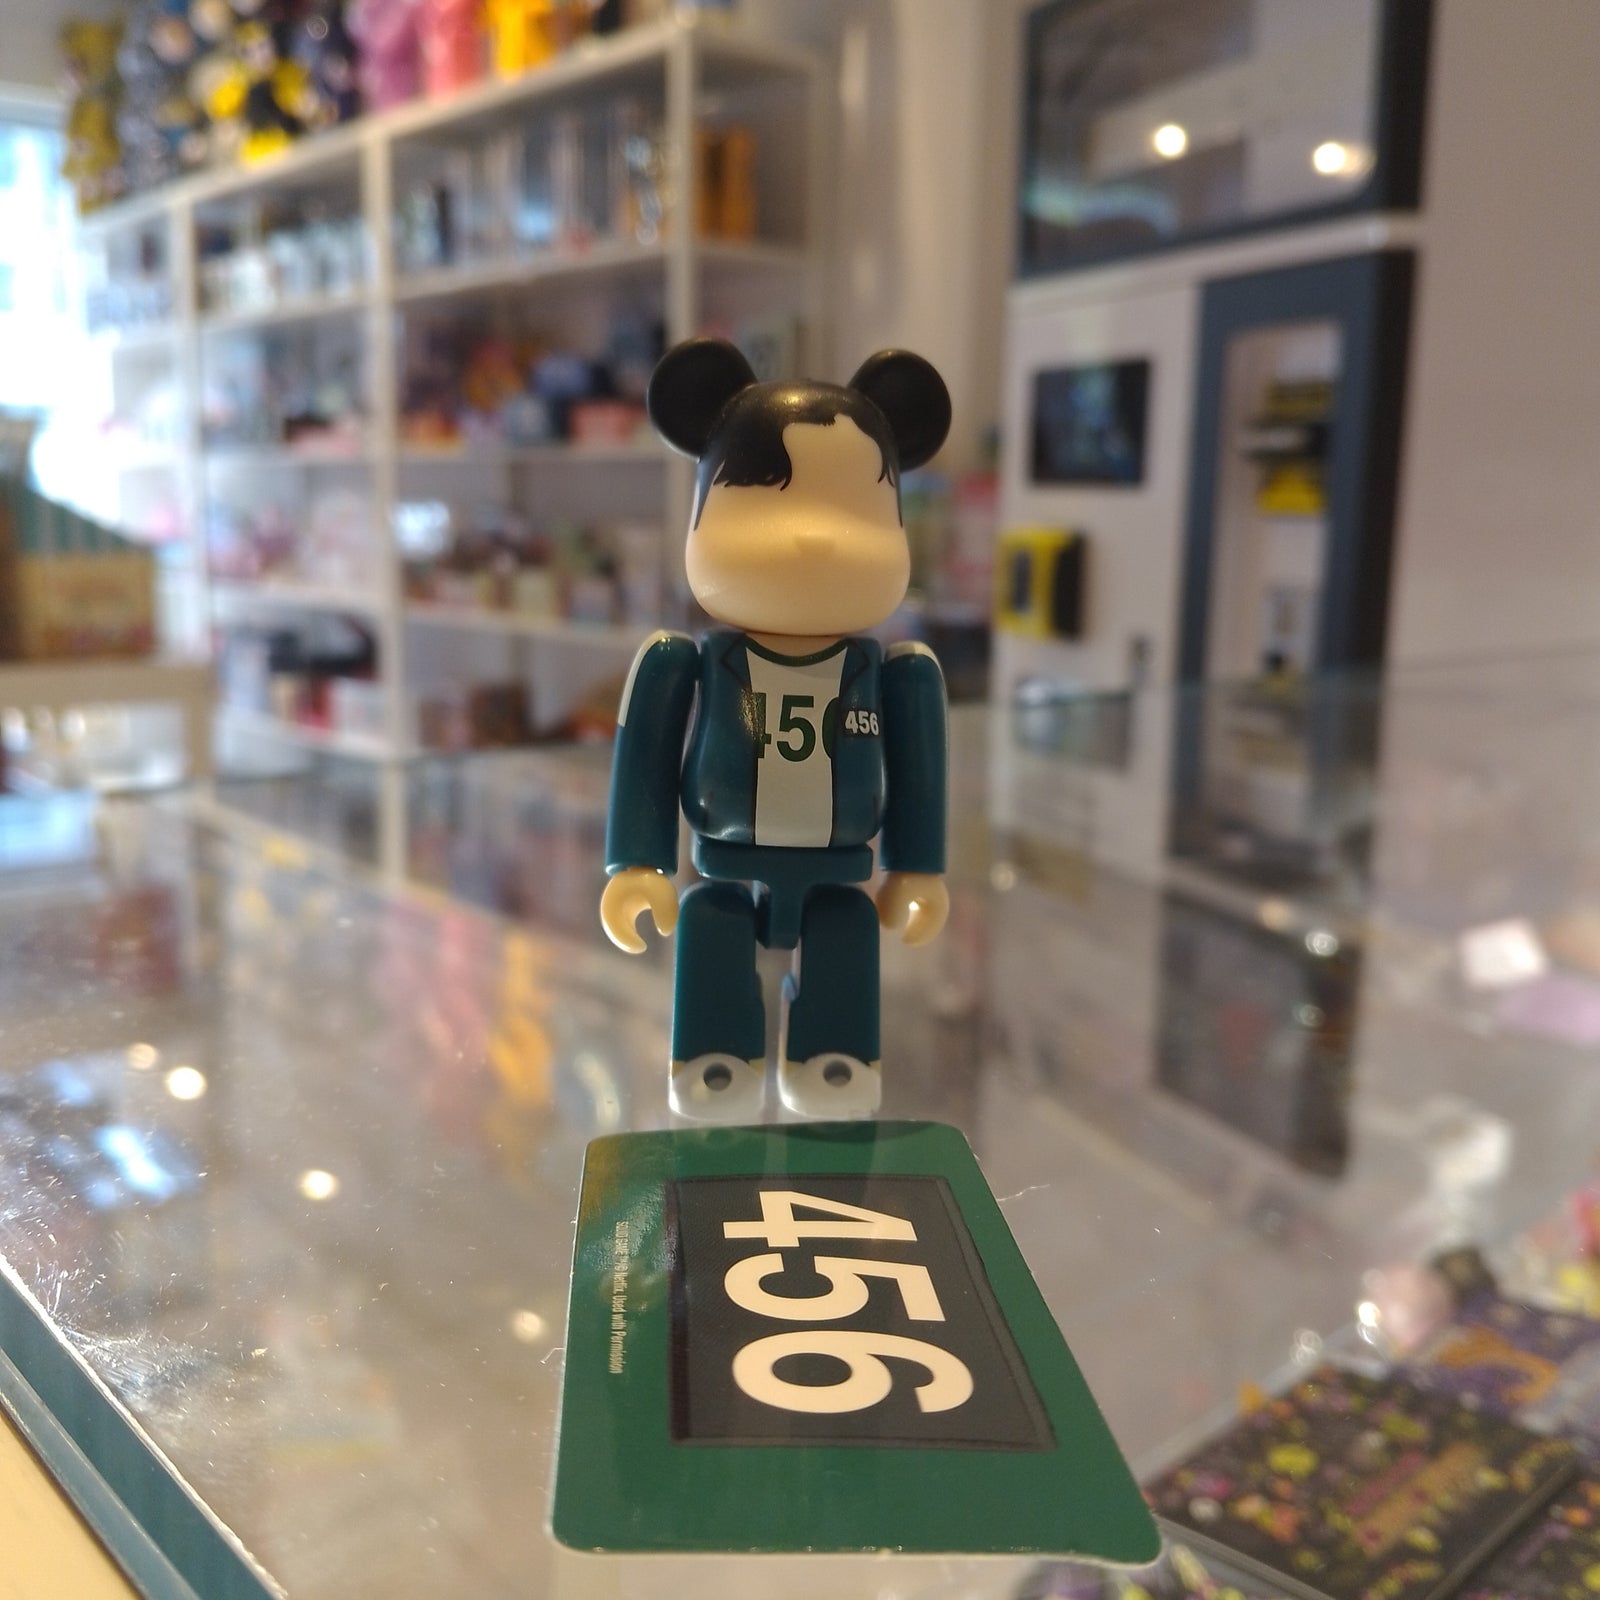 Squid Game Player 456 - Bearbrick Series 44 by Medicom Toy